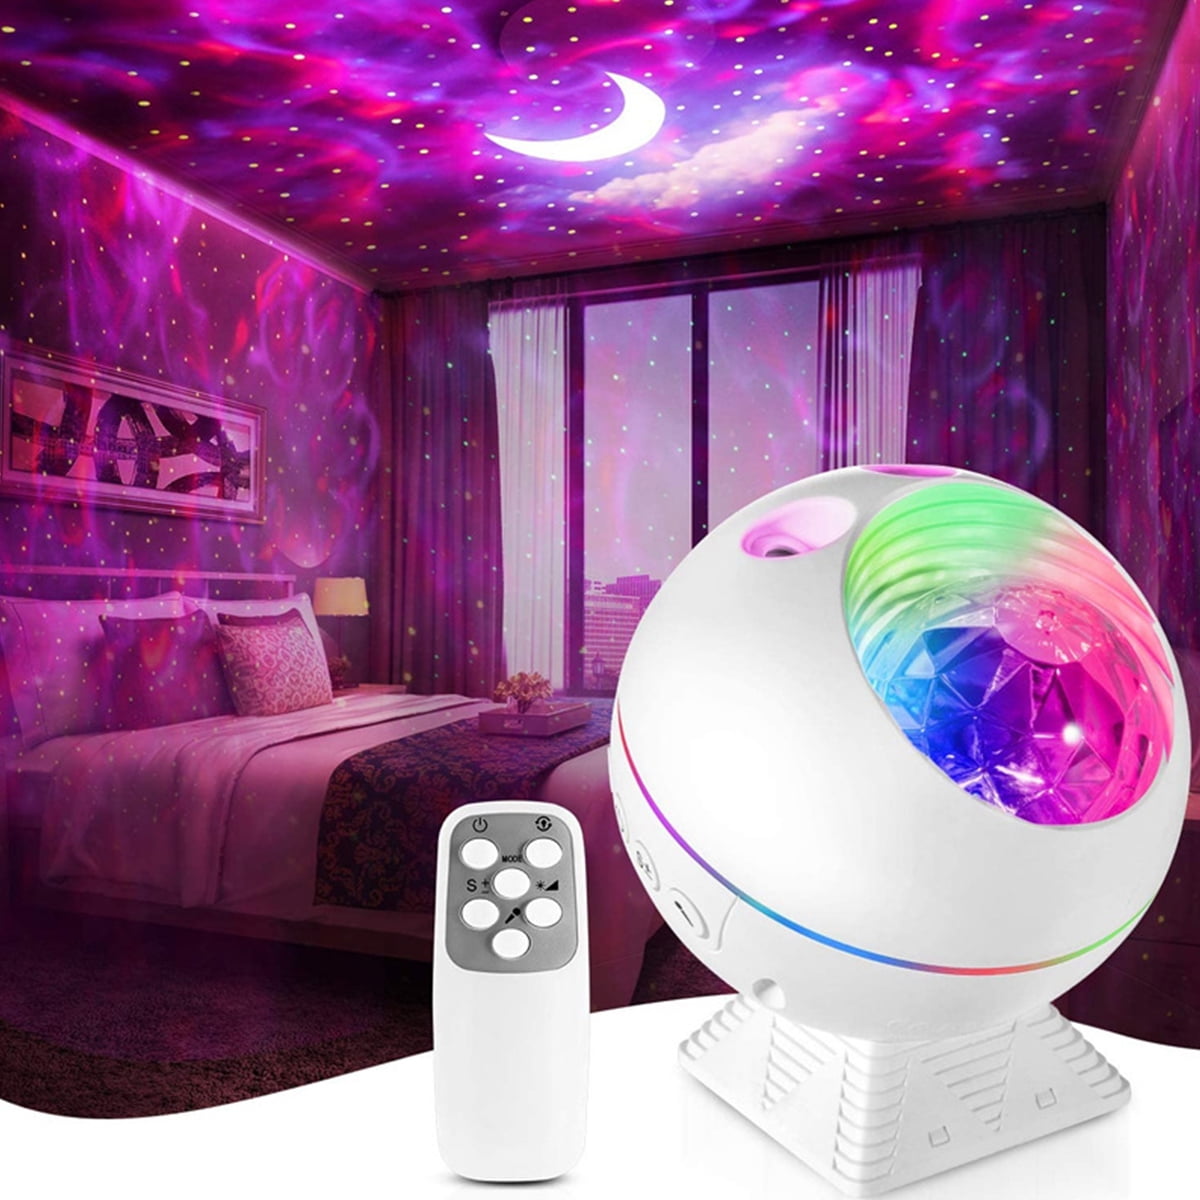 Dynamic Projection lamp,LED Light Projector for Bedroom,6 Colors Mode Starry Sky Projector,with Built-in Music,for Living Room,Party,Room 